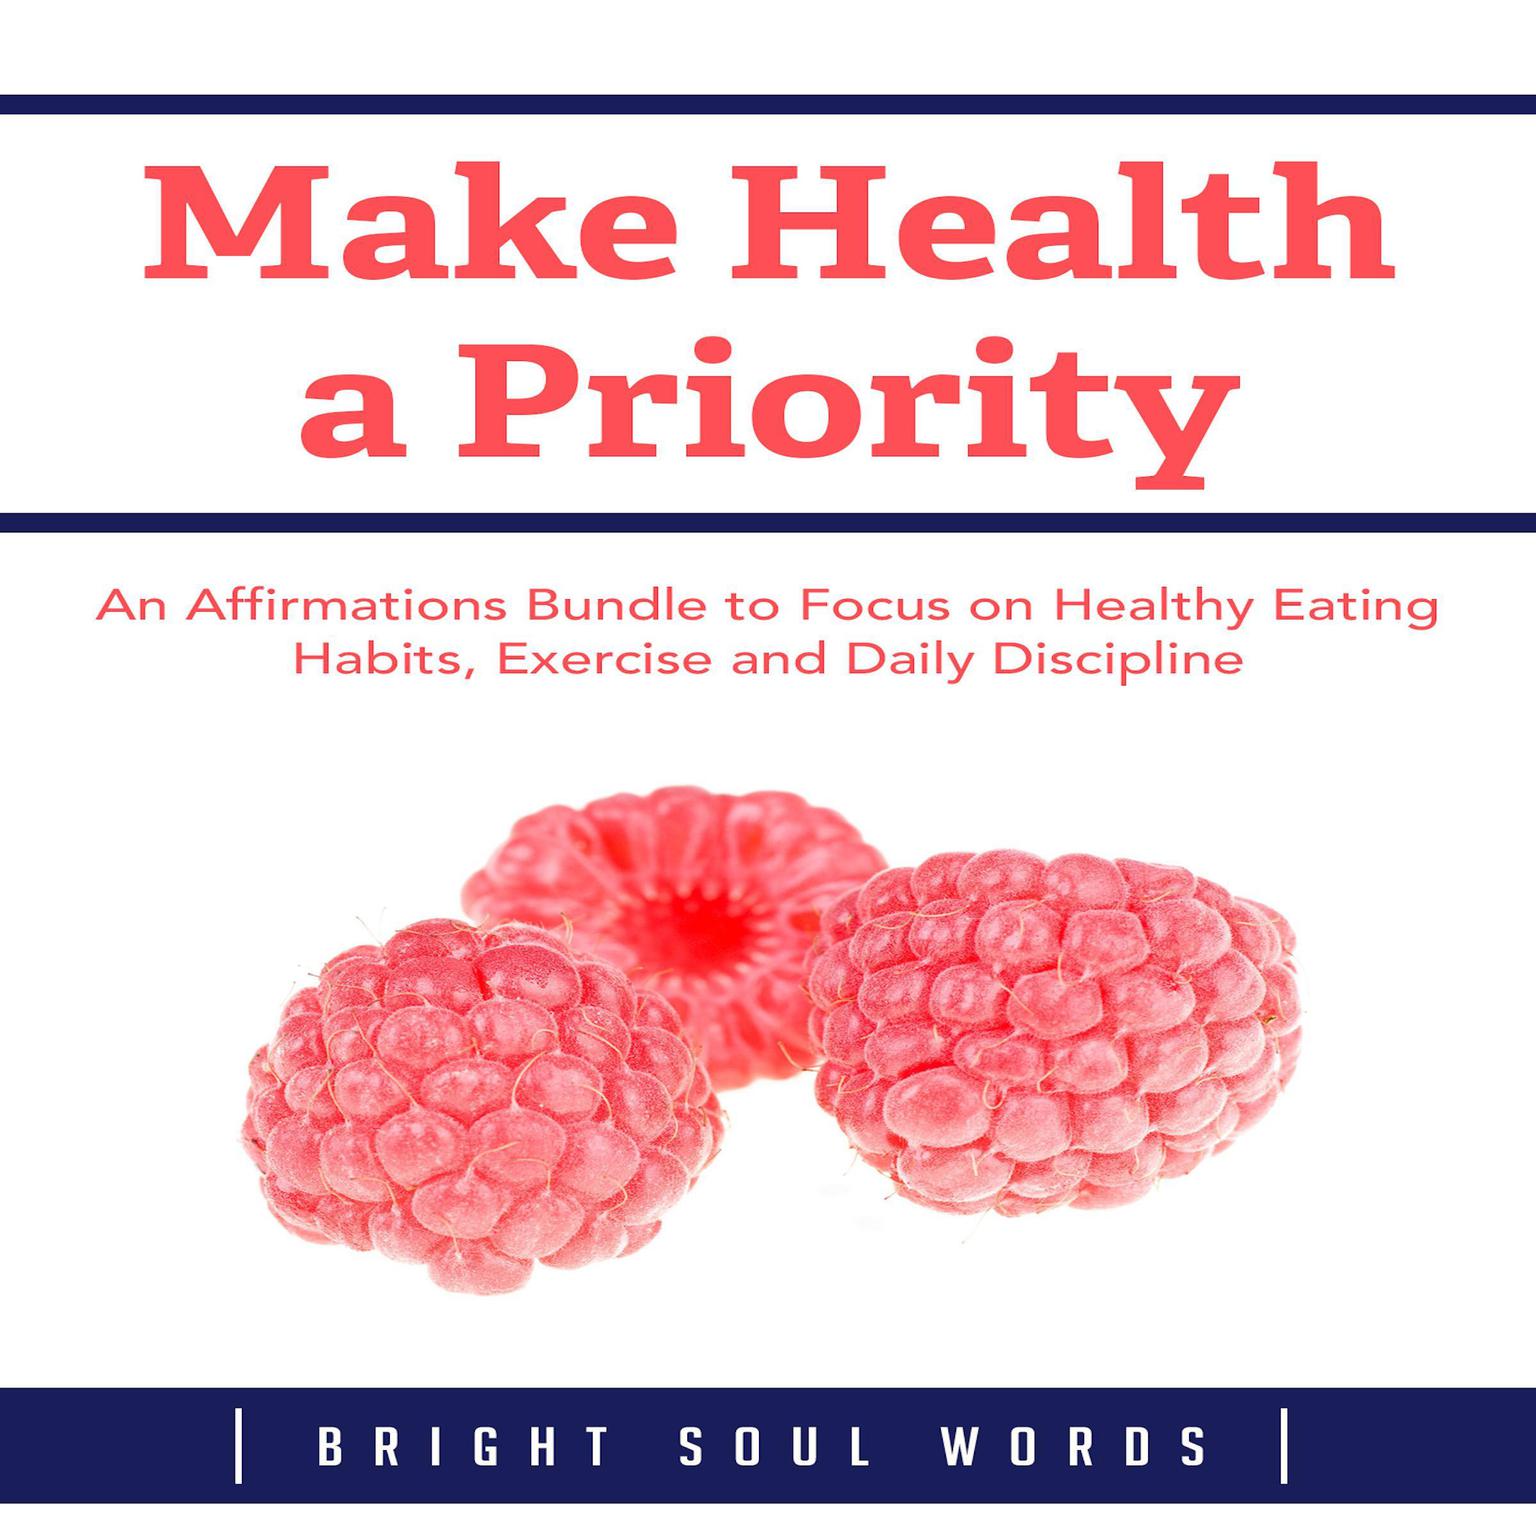 Make Health a Priority: An Affirmations Bundle to Focus on Healthy Eating Habits, Exercise and Daily Discipline Audiobook, by Bright Soul Words